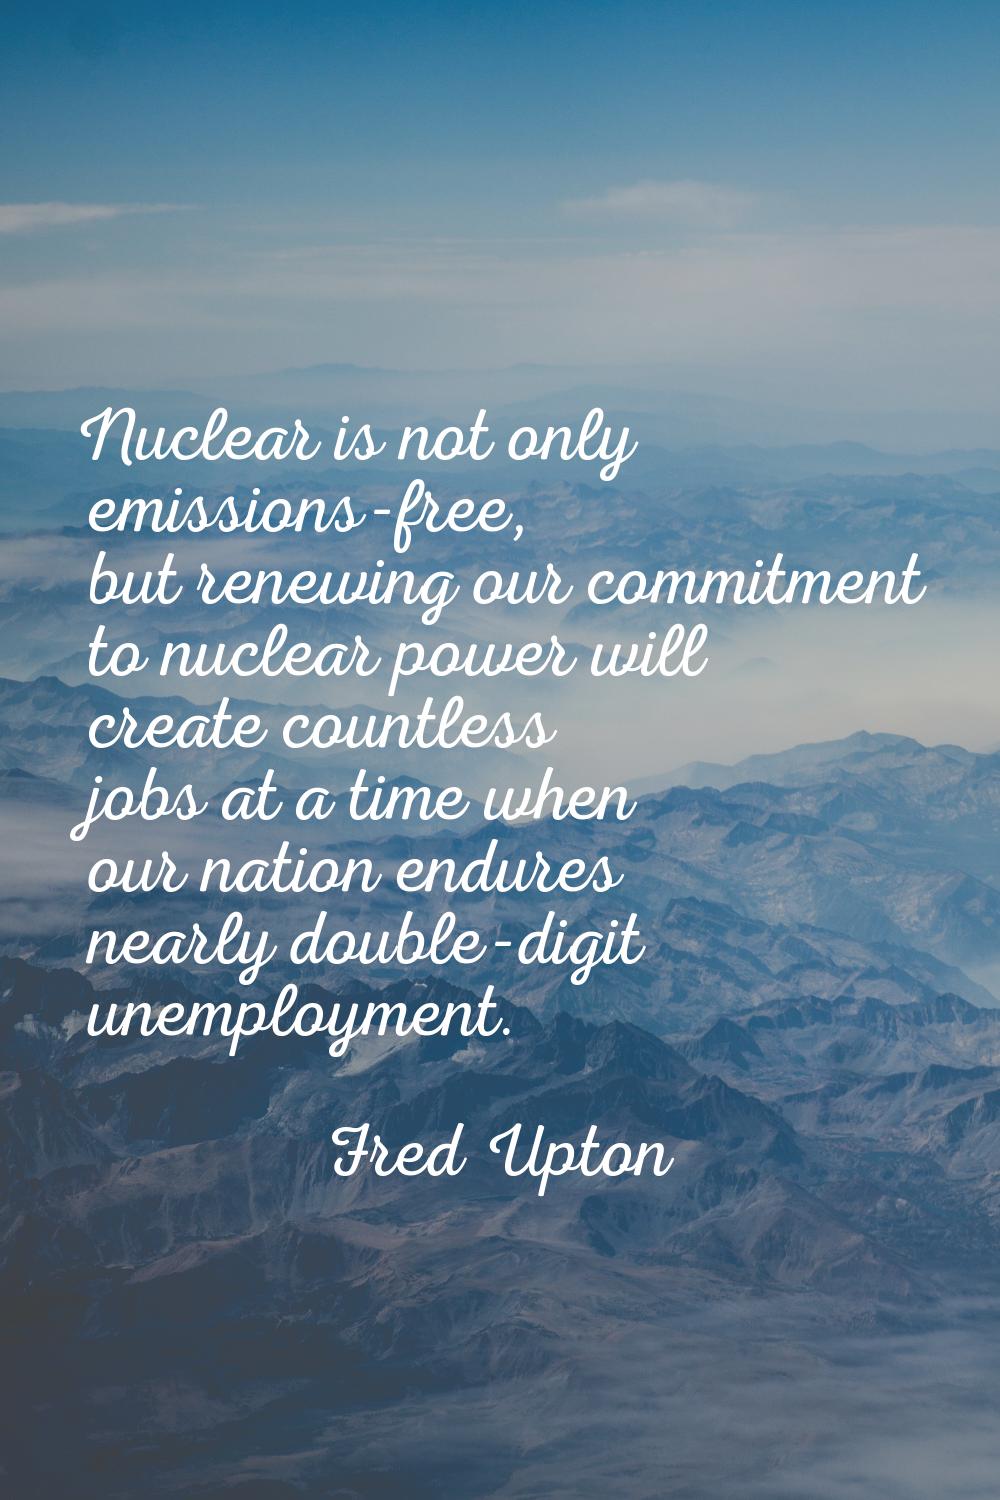 Nuclear is not only emissions-free, but renewing our commitment to nuclear power will create countl